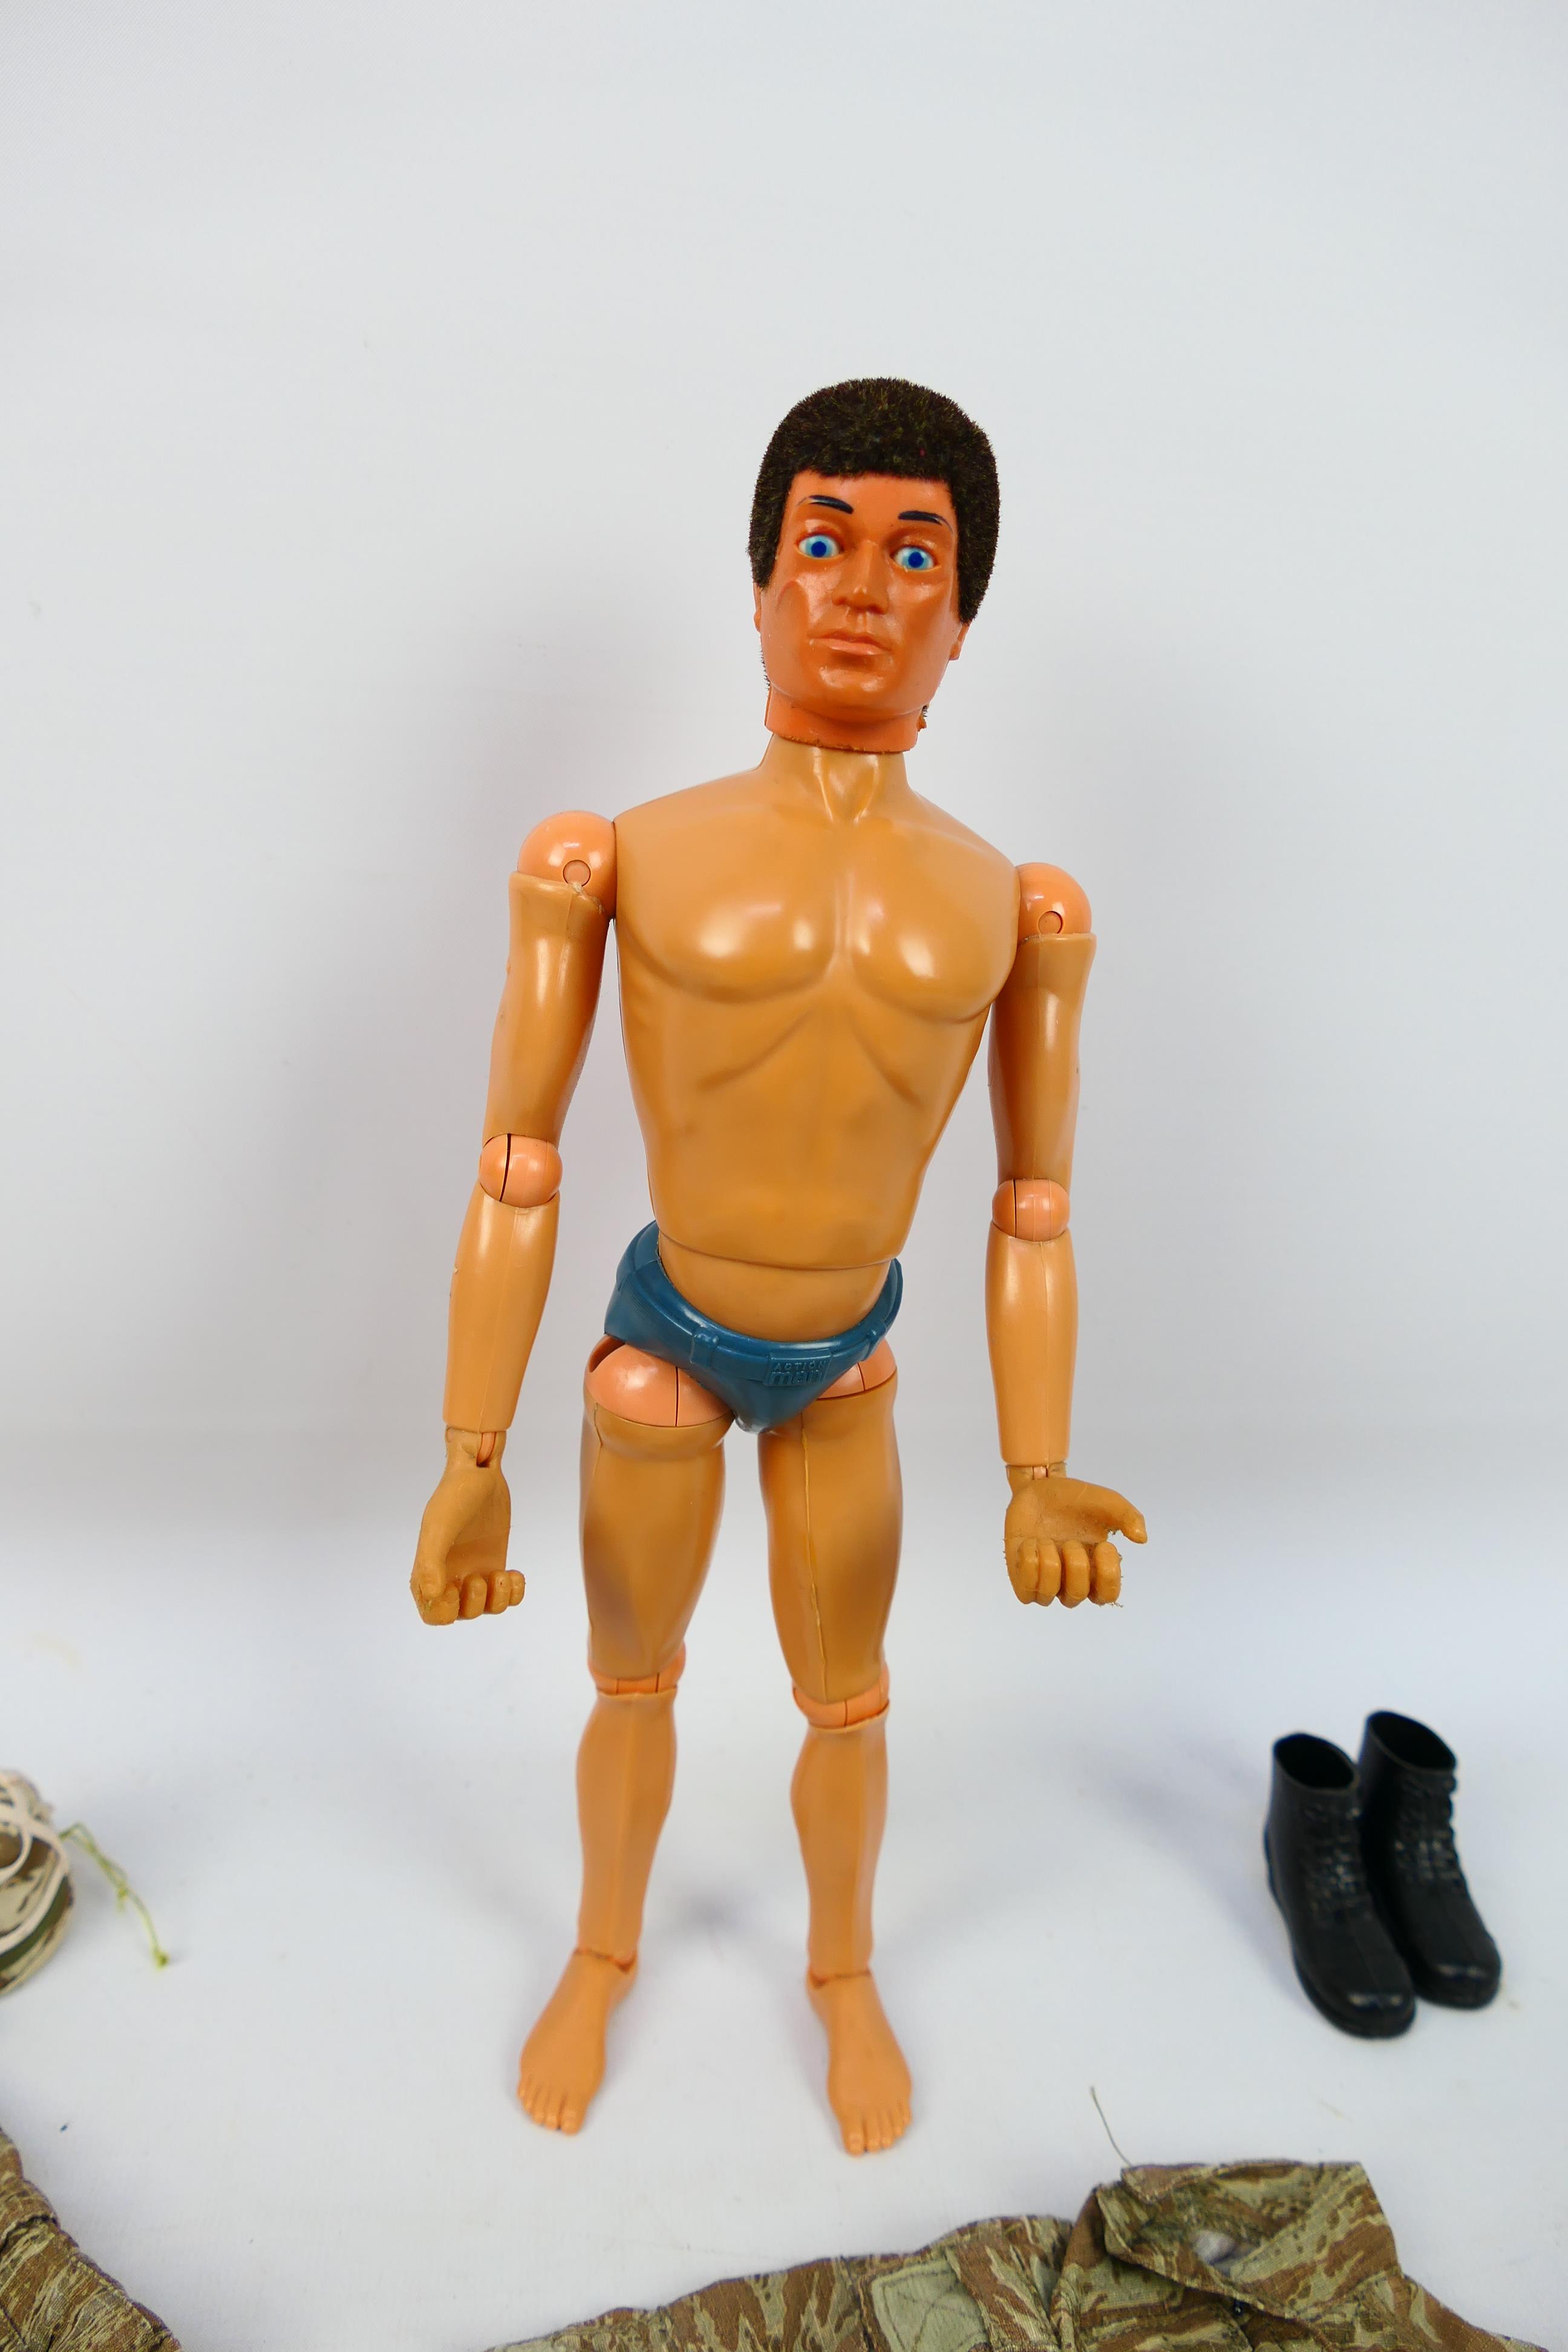 Palitoy - Action Man - An unboxed 1978 Action Man action figure with Flock hair, - Image 4 of 12